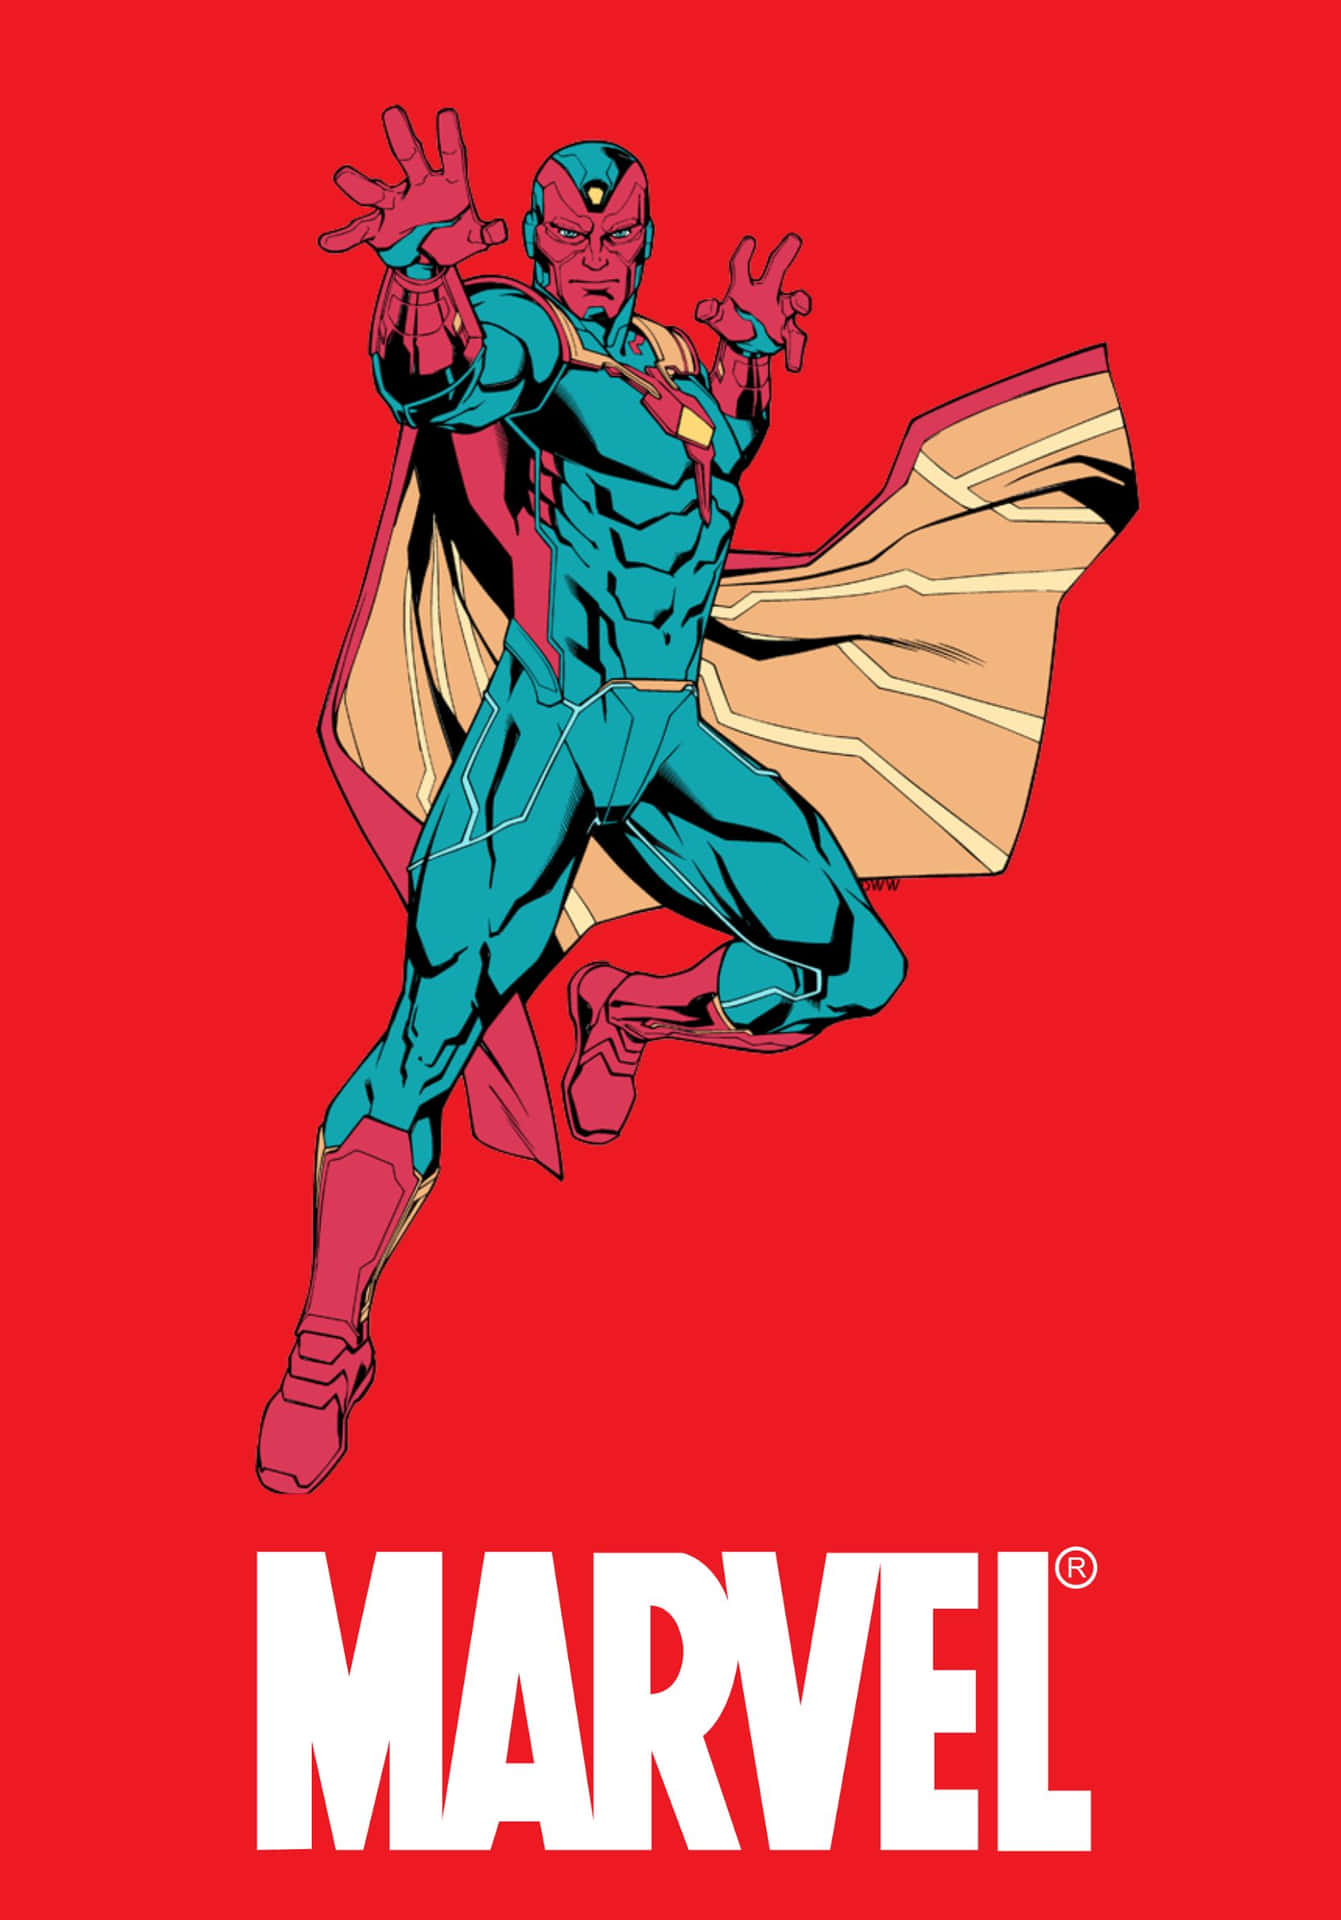 "Be part of the Best Marvel universe - Join the journey!"